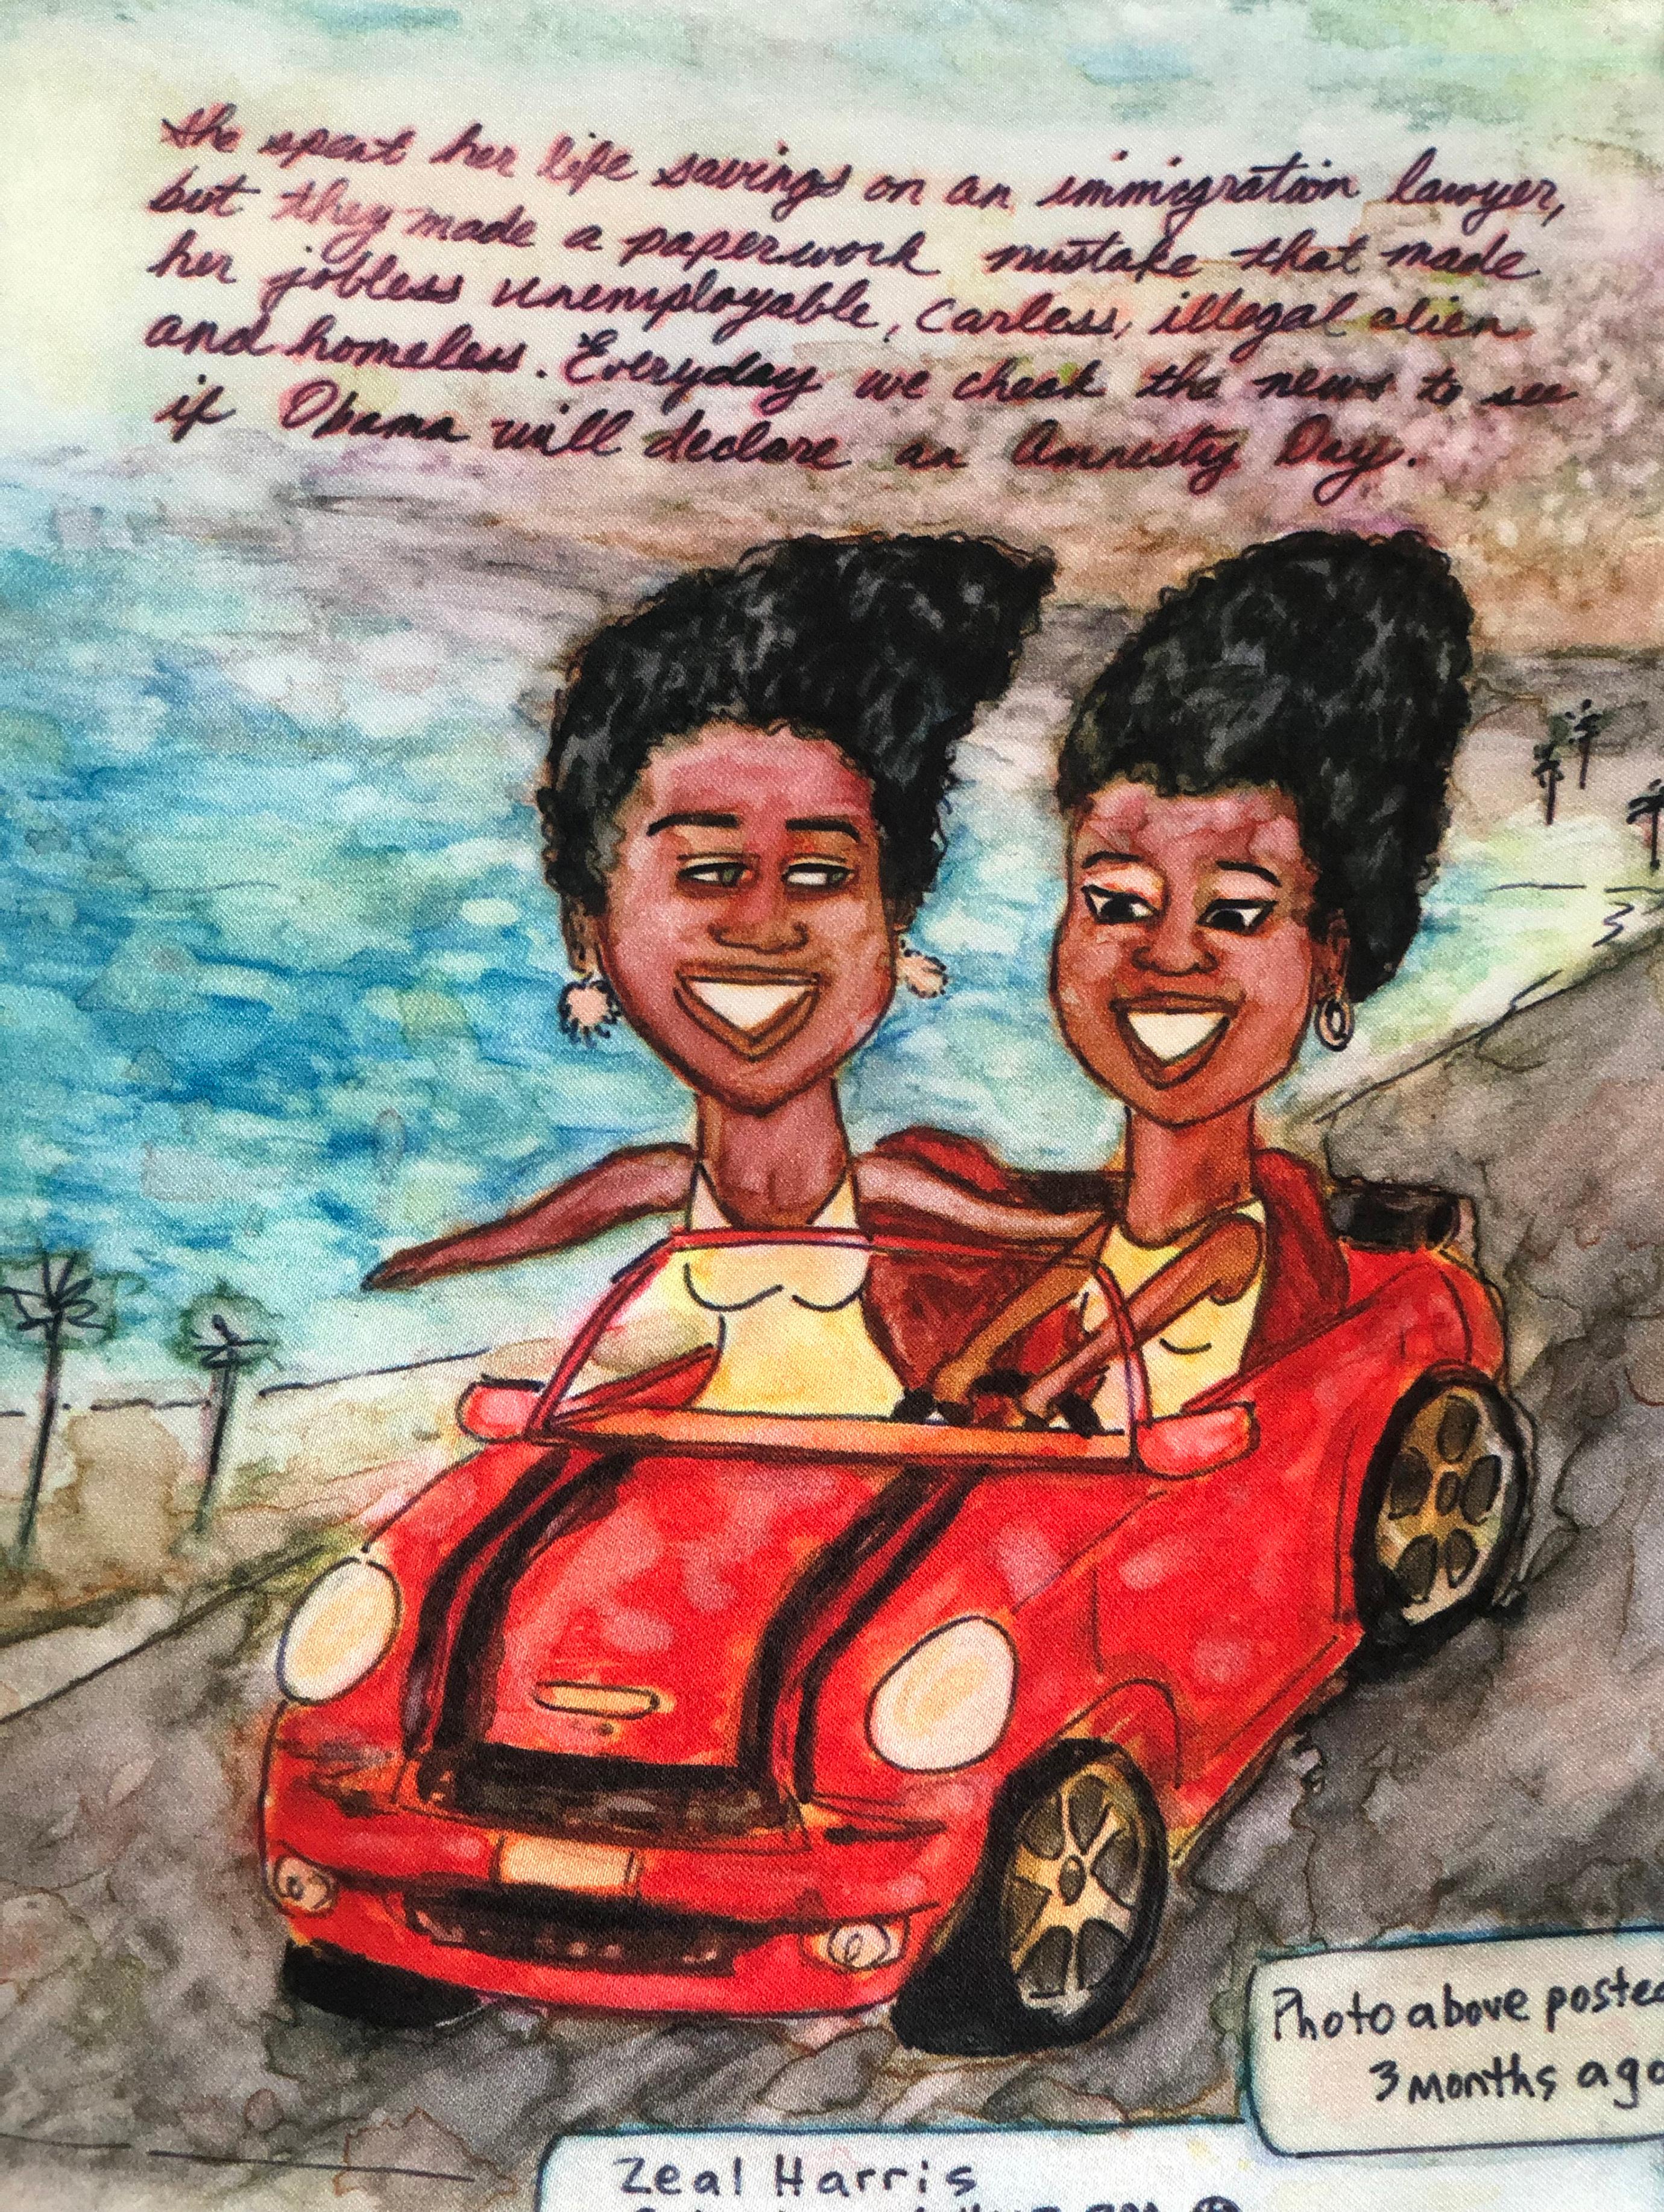 Zeal Harris is known for creating seductive, caricaturesque, political, urban-vernacular, story paintings, with a blunt mix of high-brow/low-brow elements. Her micro-narratives offer socio-political commentary about a range of larger issues that